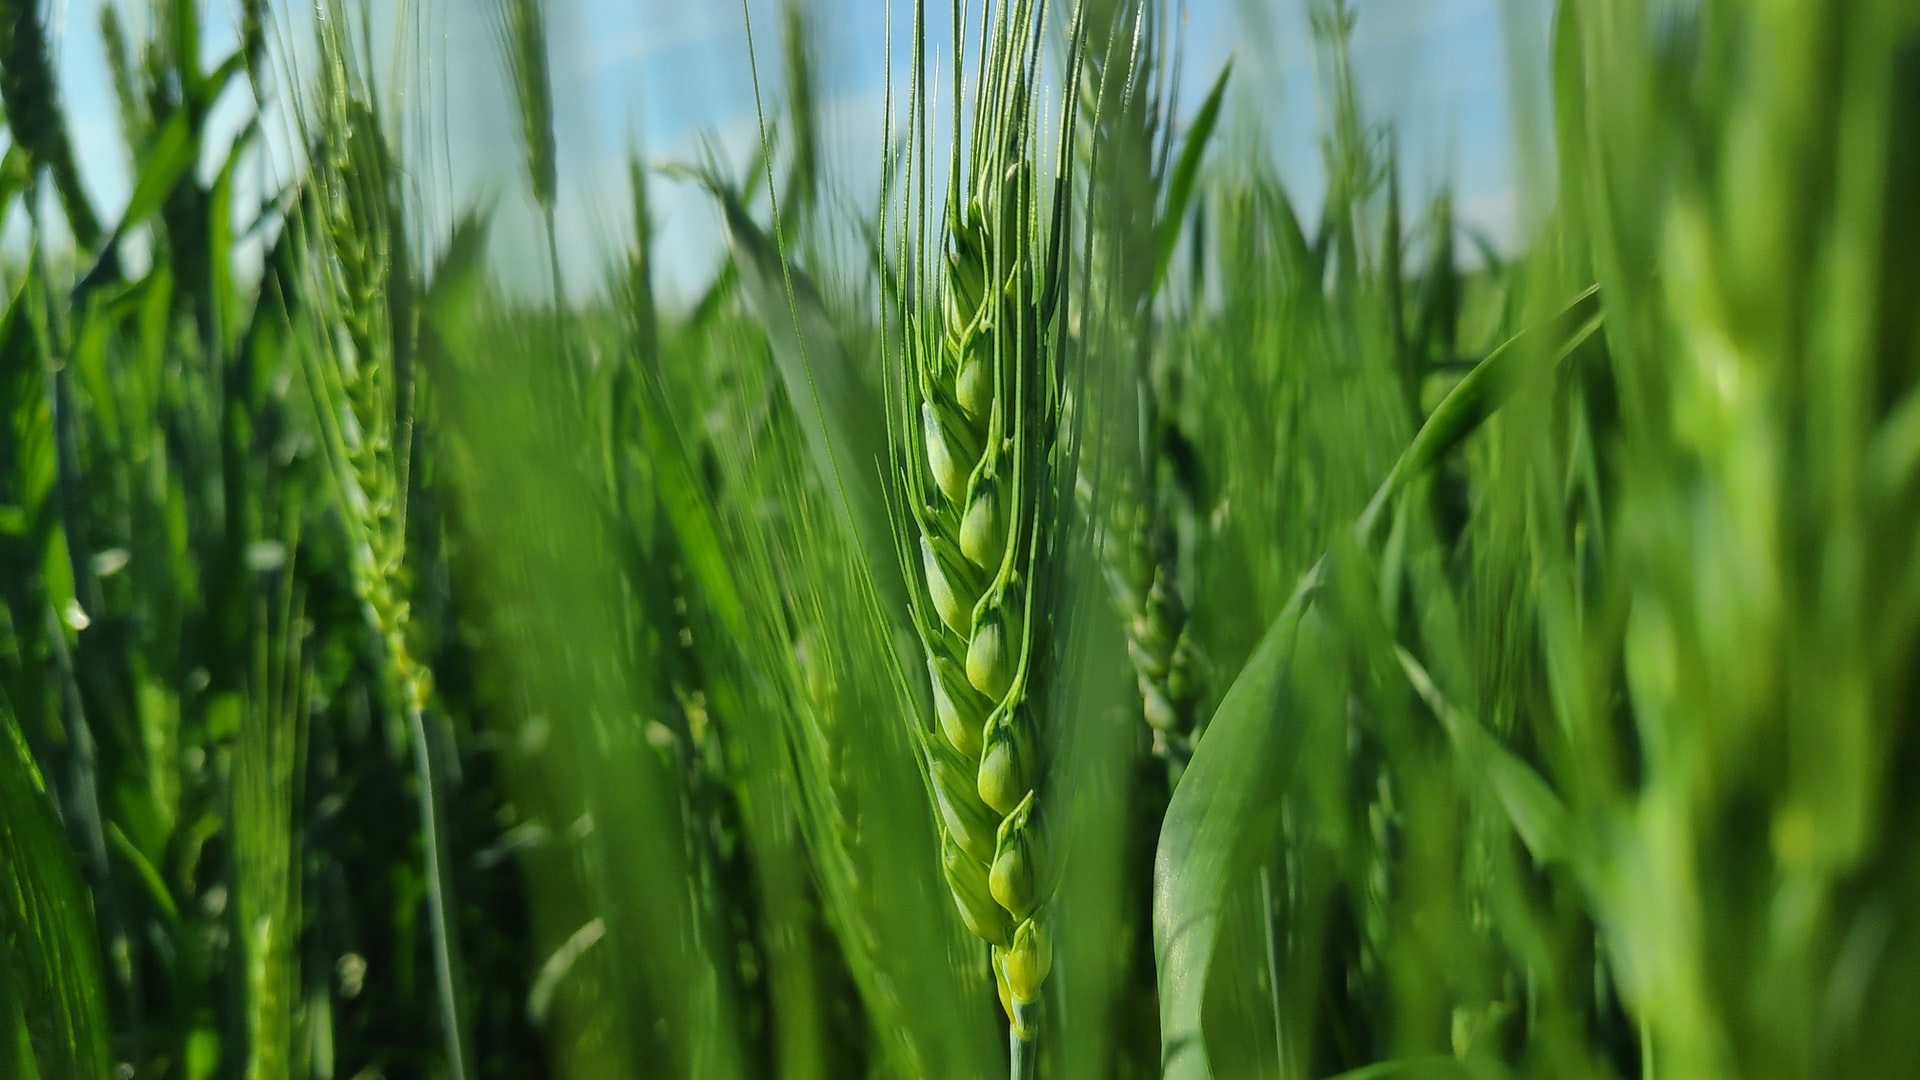 Project to encourage inter-cropping as a strategy to control pests & parasites in cereal crops